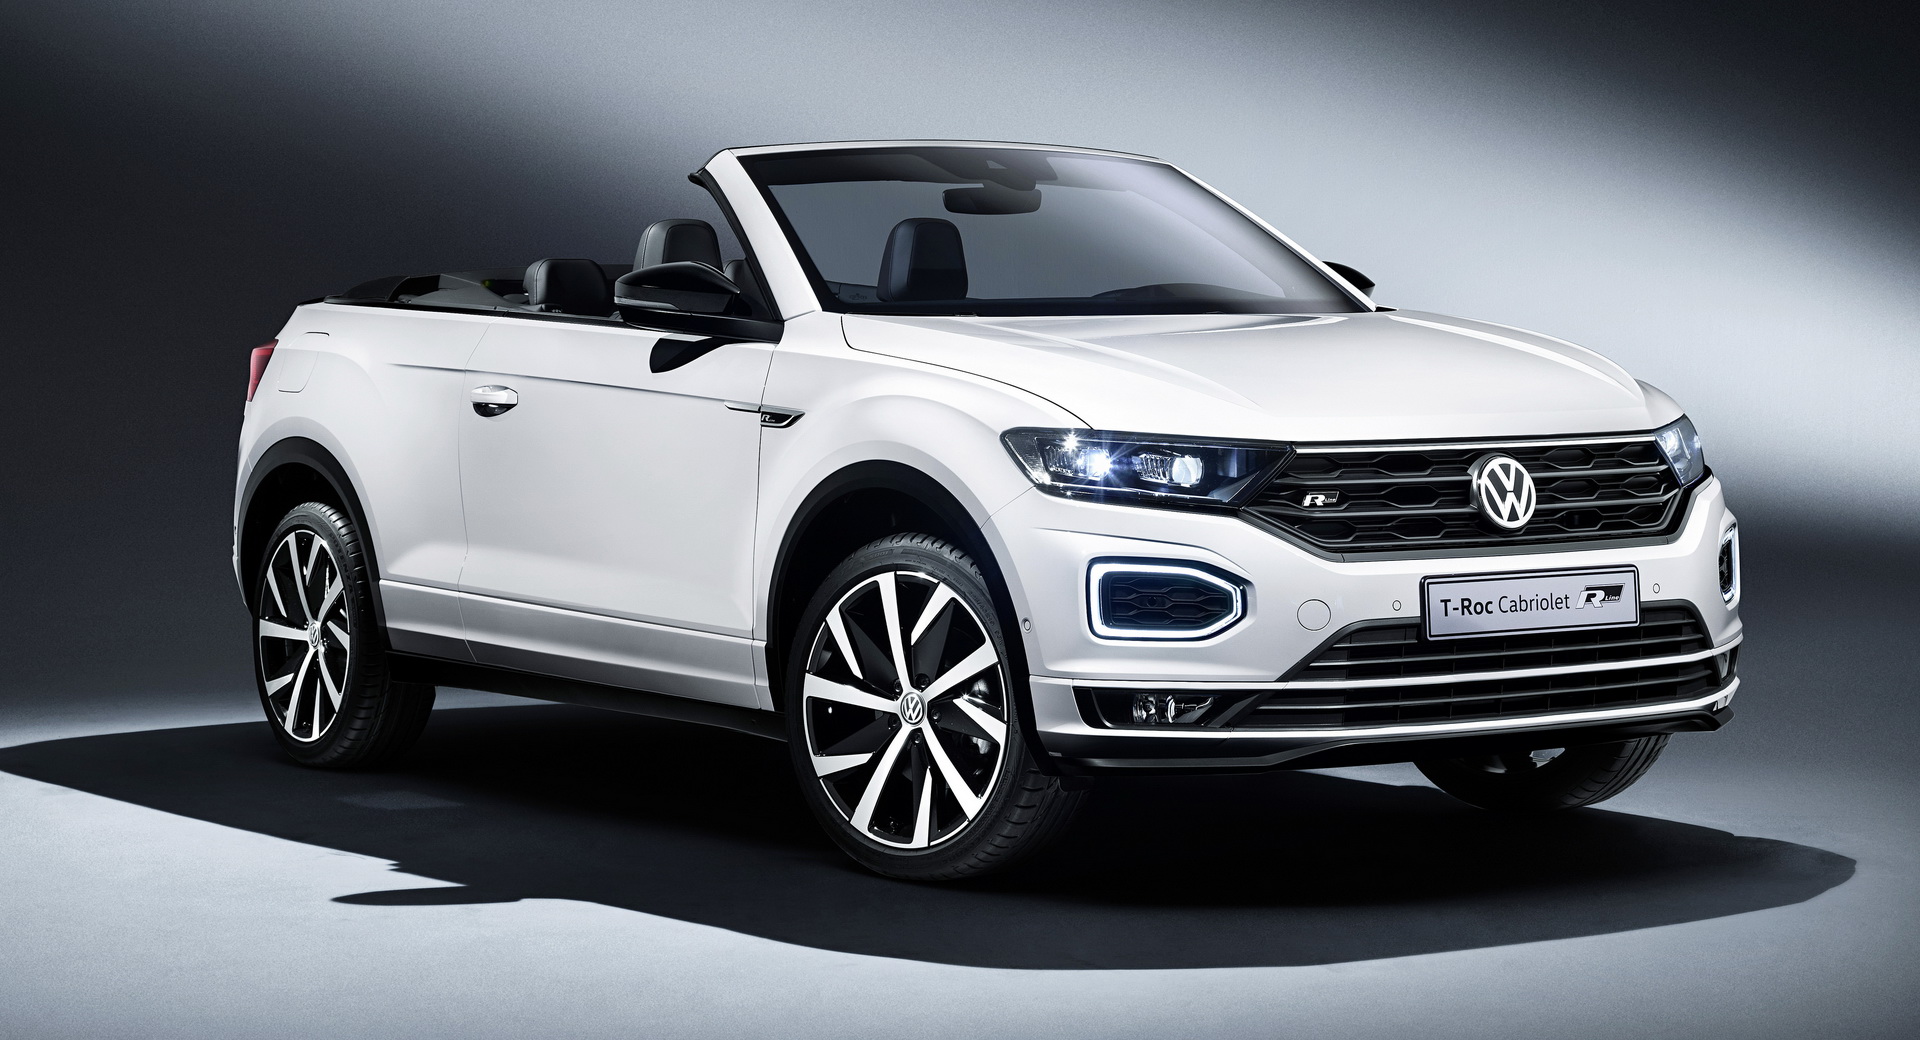 2020 VW TRoc Cabriolet Available Now In The UK, Priced From £26,750